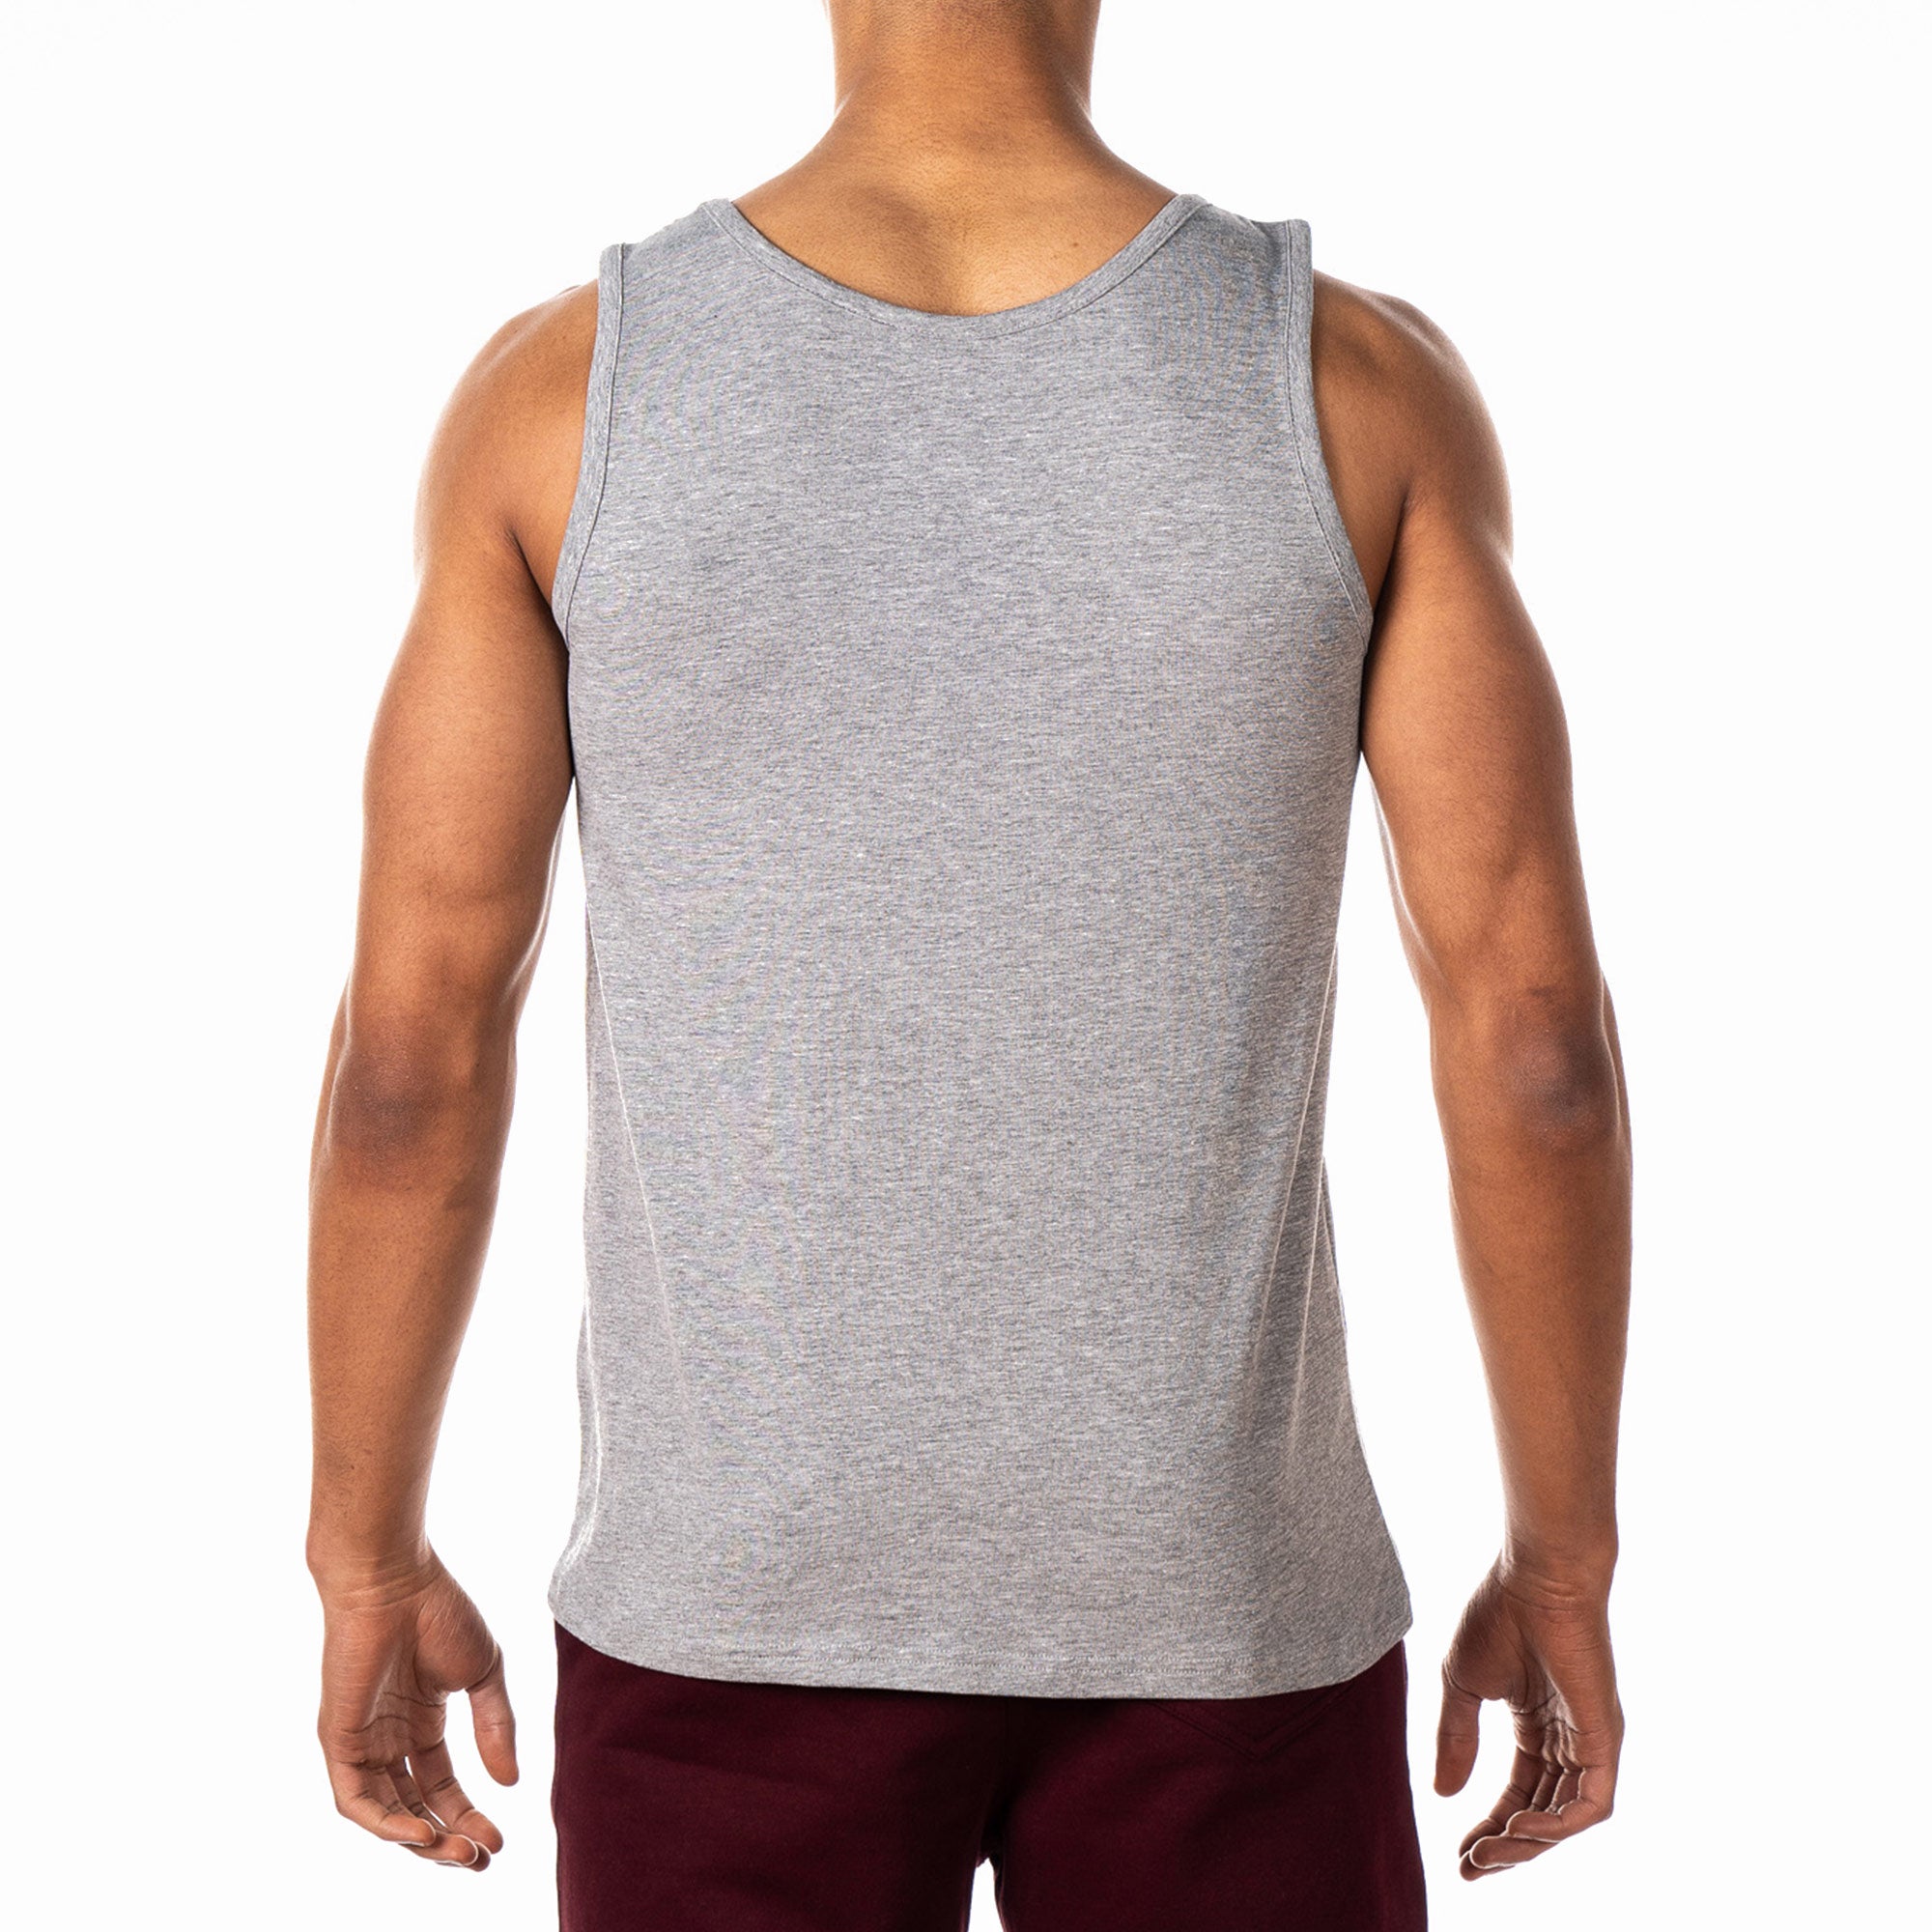 The Beast Within Gym Vest